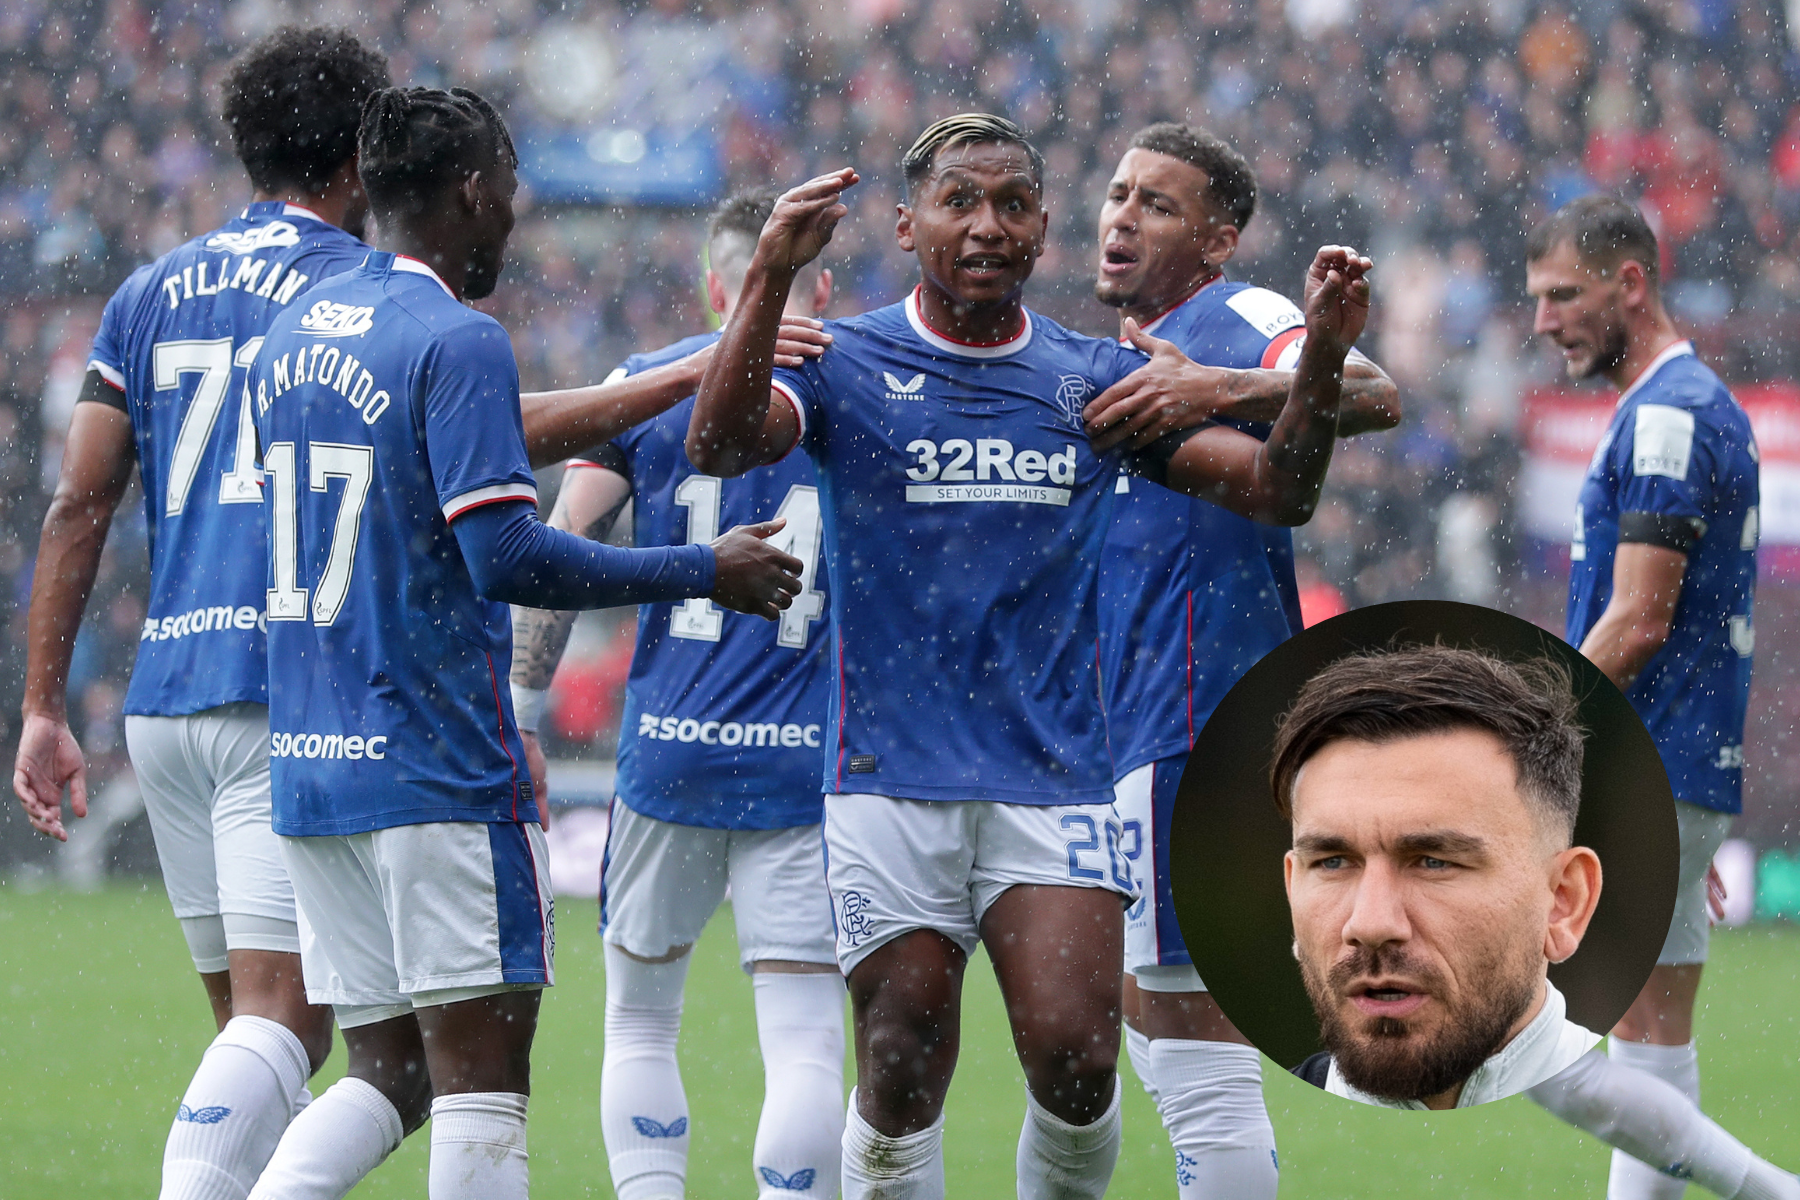 Robert Snodgrass on how Rangers can silence Liverpool at Anfield - the toughest venue in English football